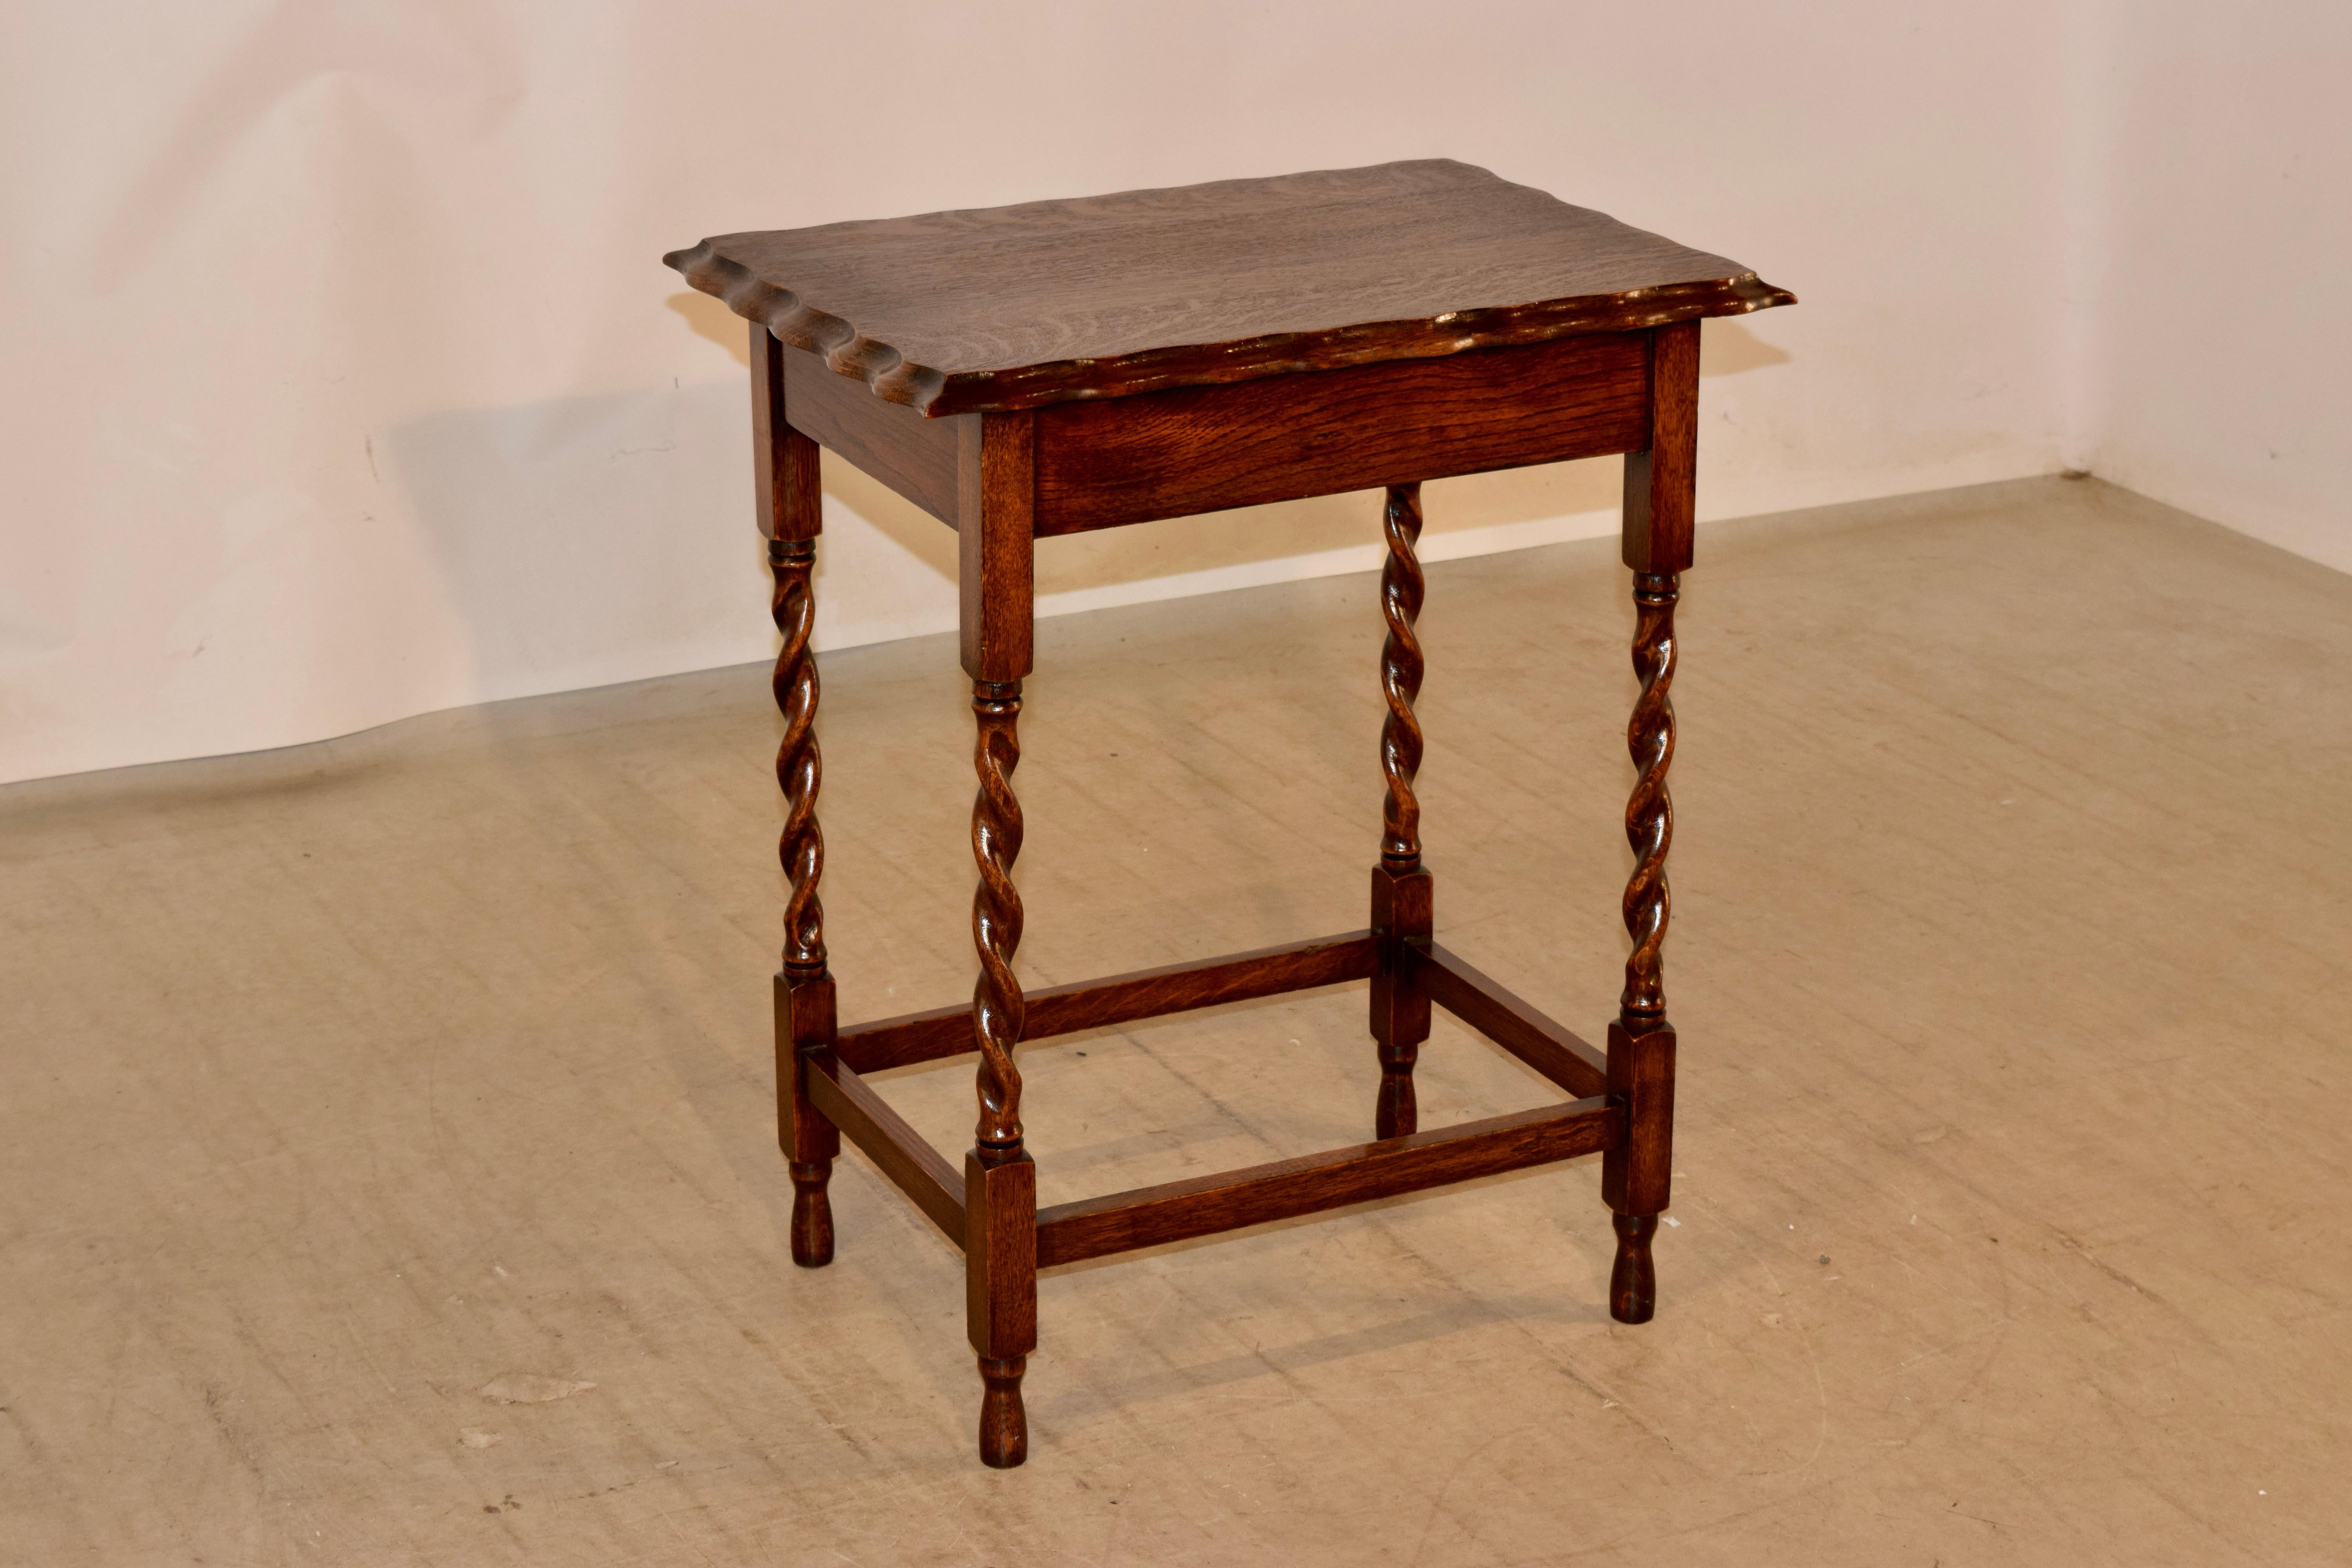 English oak occasional table, circa 1900. the top has an exquisitely scalloped and beveled edge around the top over a simple apron and supported on hand turned barley twist legs, joined by simple stretchers and raised on turned feet.